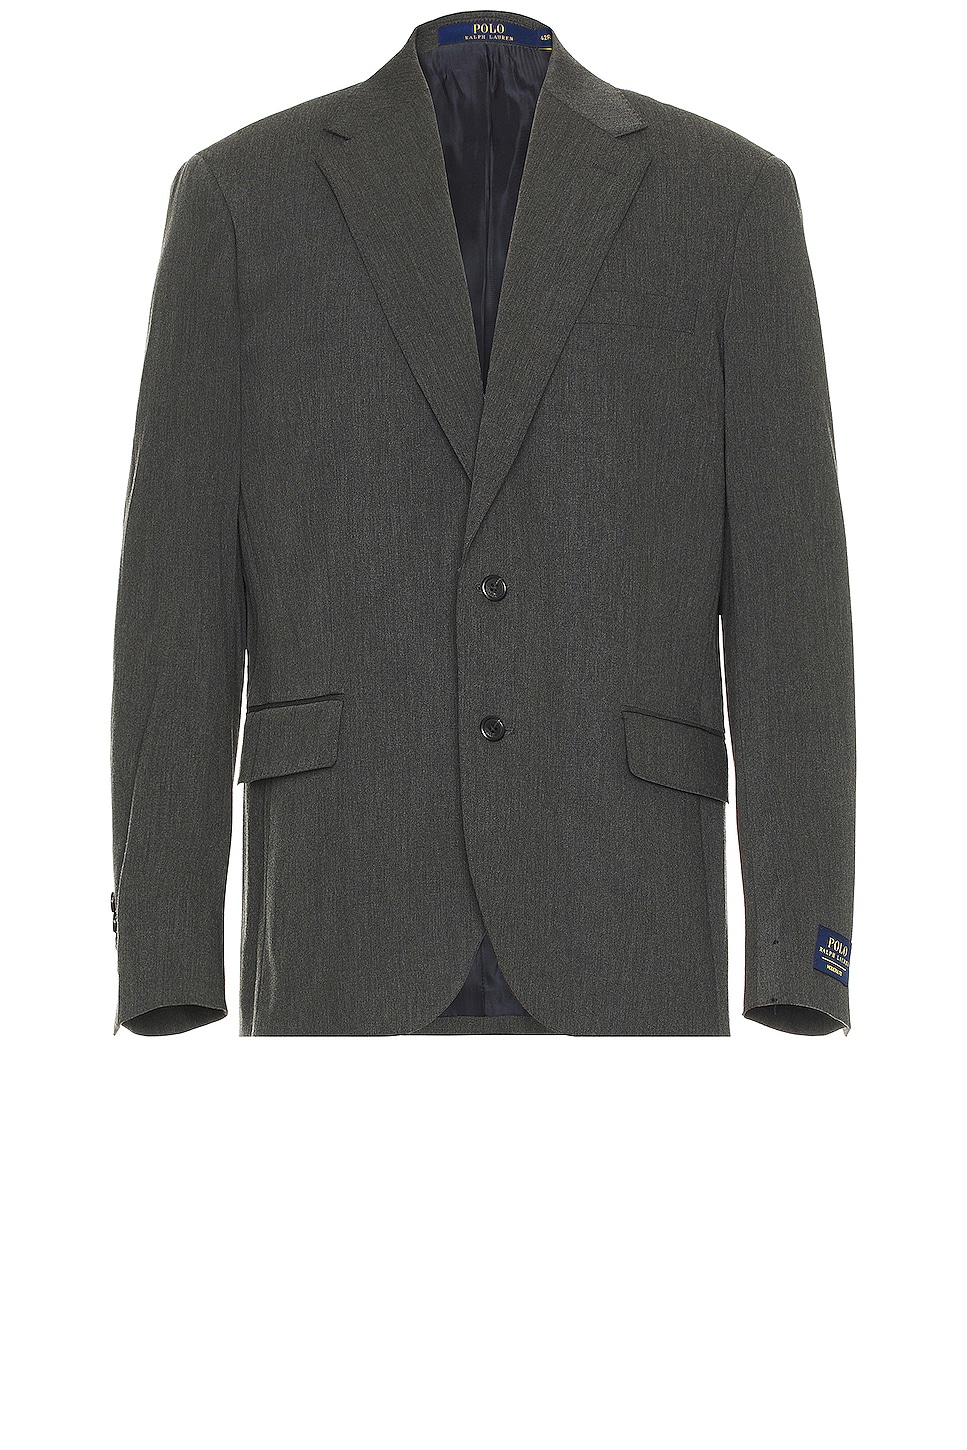 Image 1 of Polo Ralph Lauren Tailored Twill Sport Coat Blazer in Charcoal